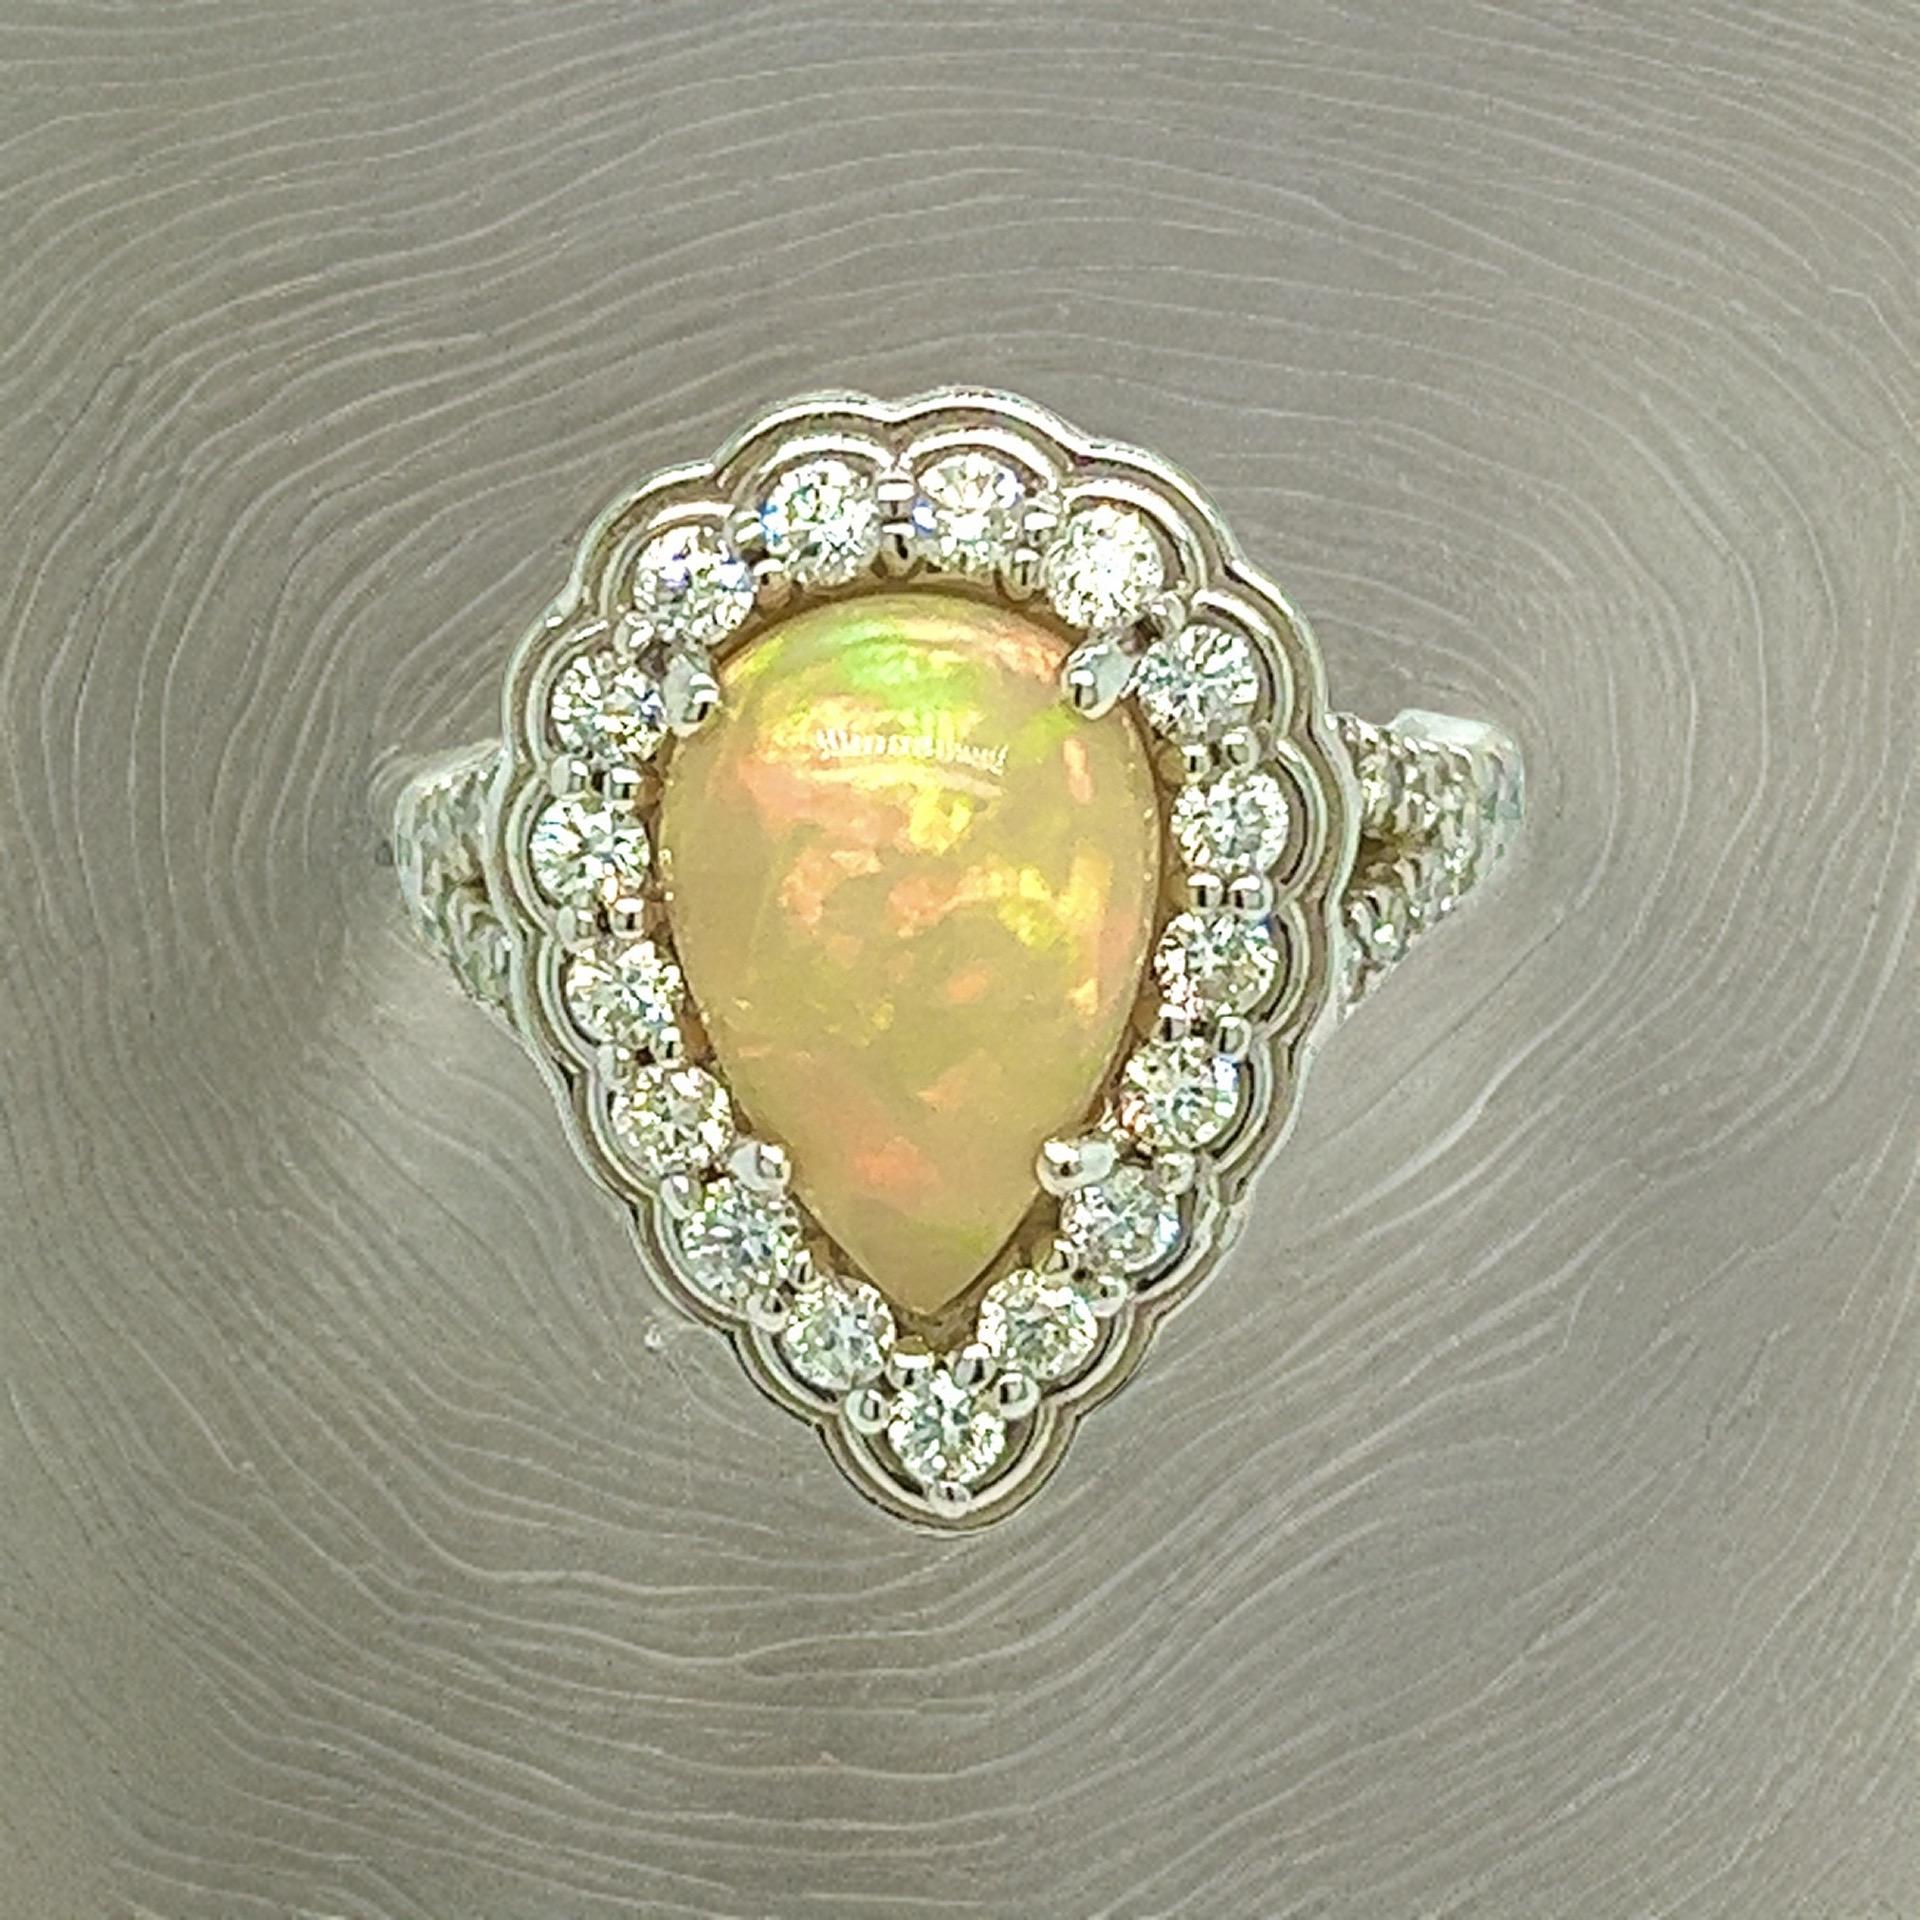 Natural Opal Diamond Ring 6.25 14k W Gold 2.35 TCW Certified For Sale 1